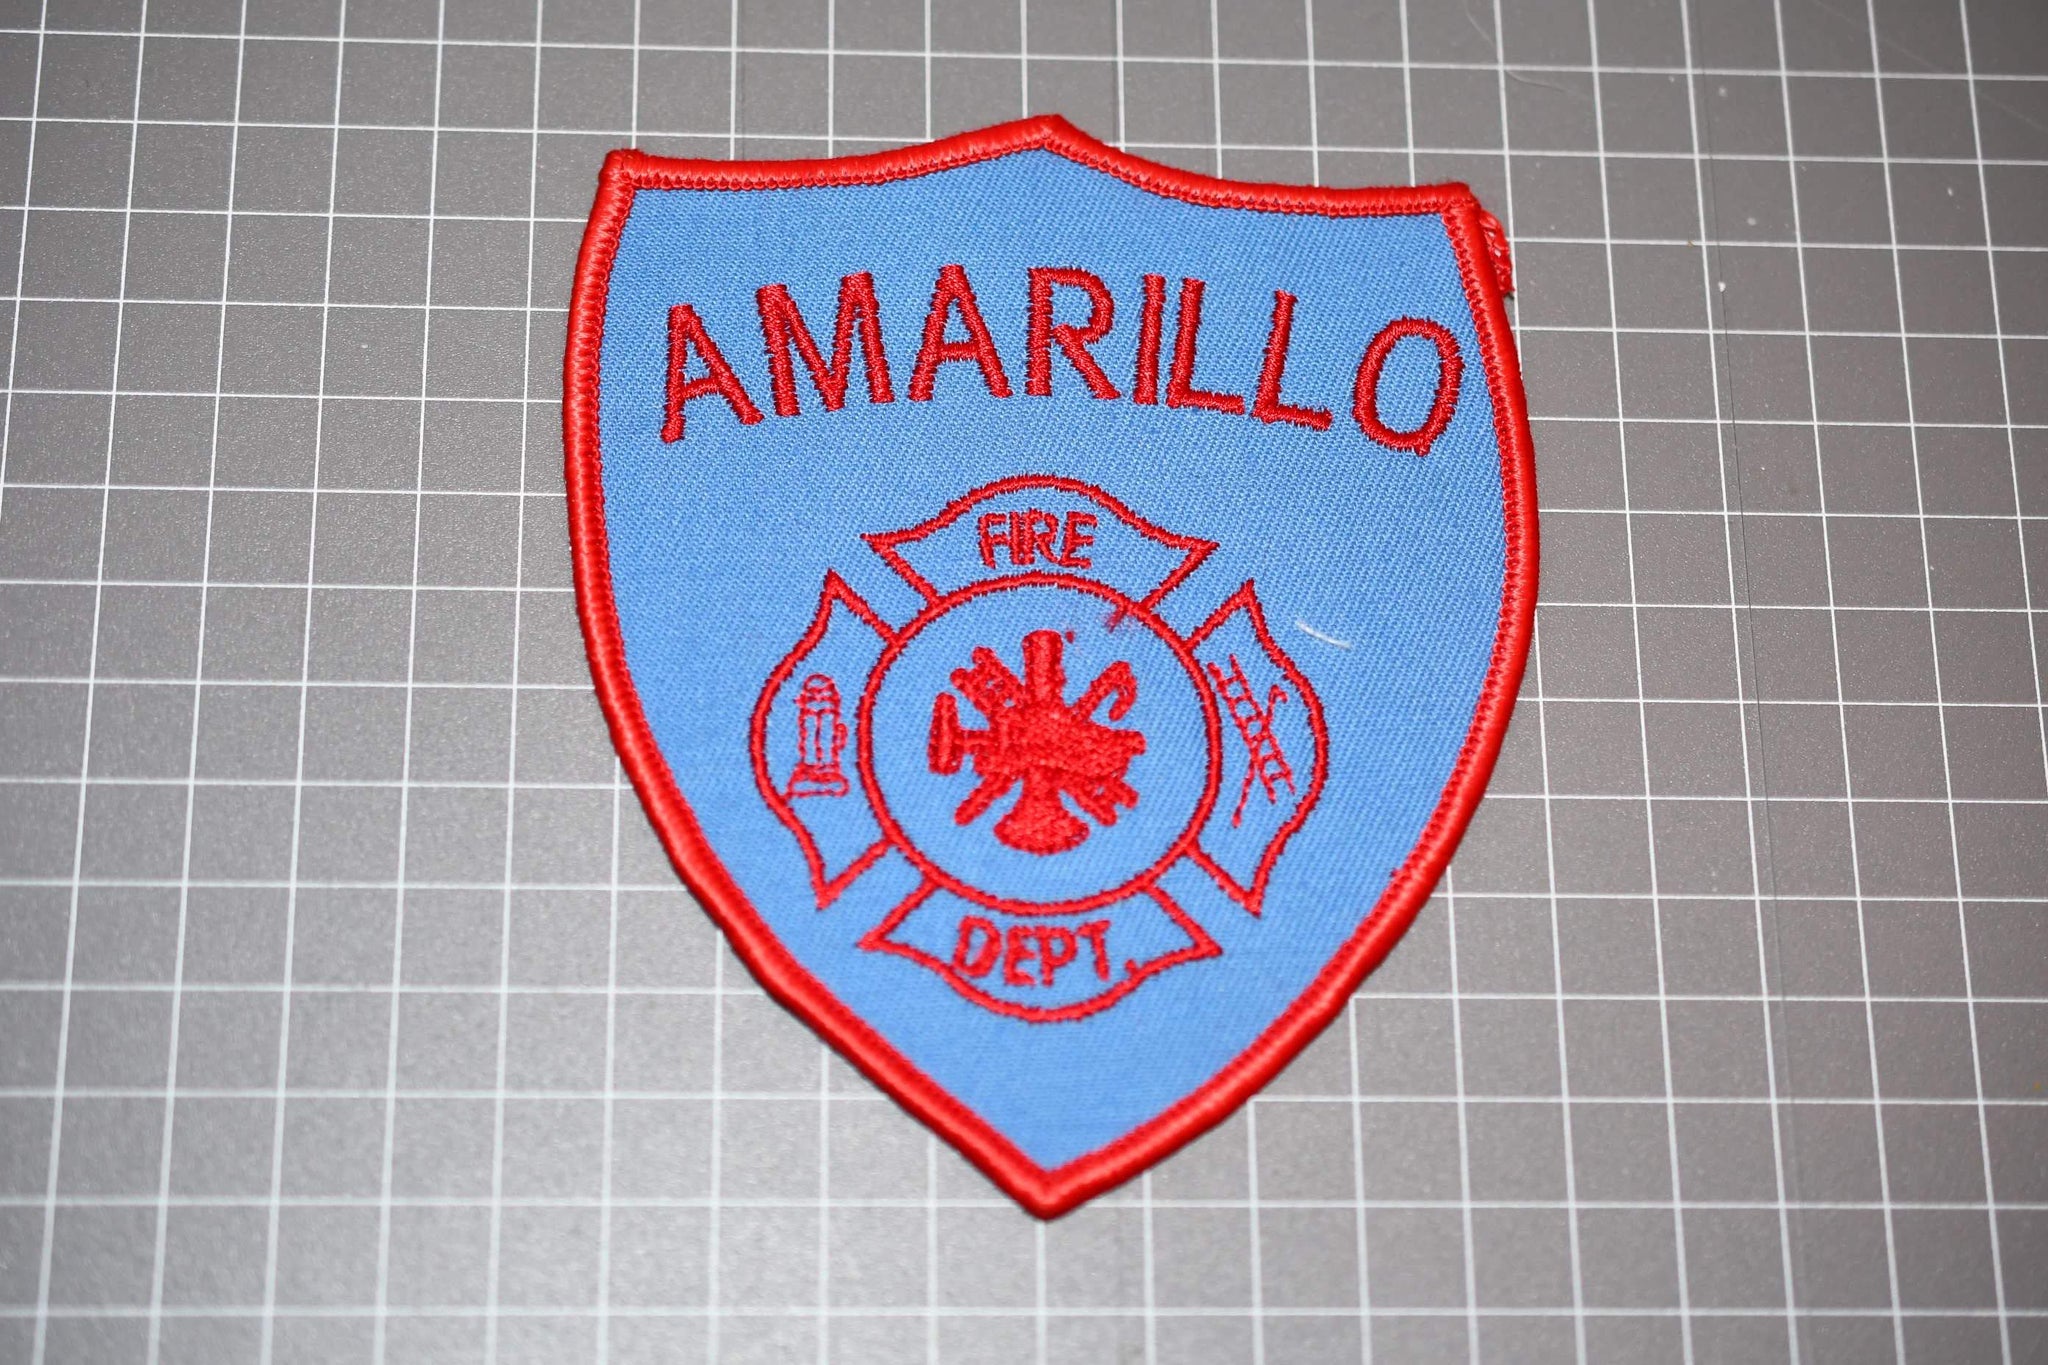 Amarillo Texas Fire Department Patch (U.S. Fire Patches)